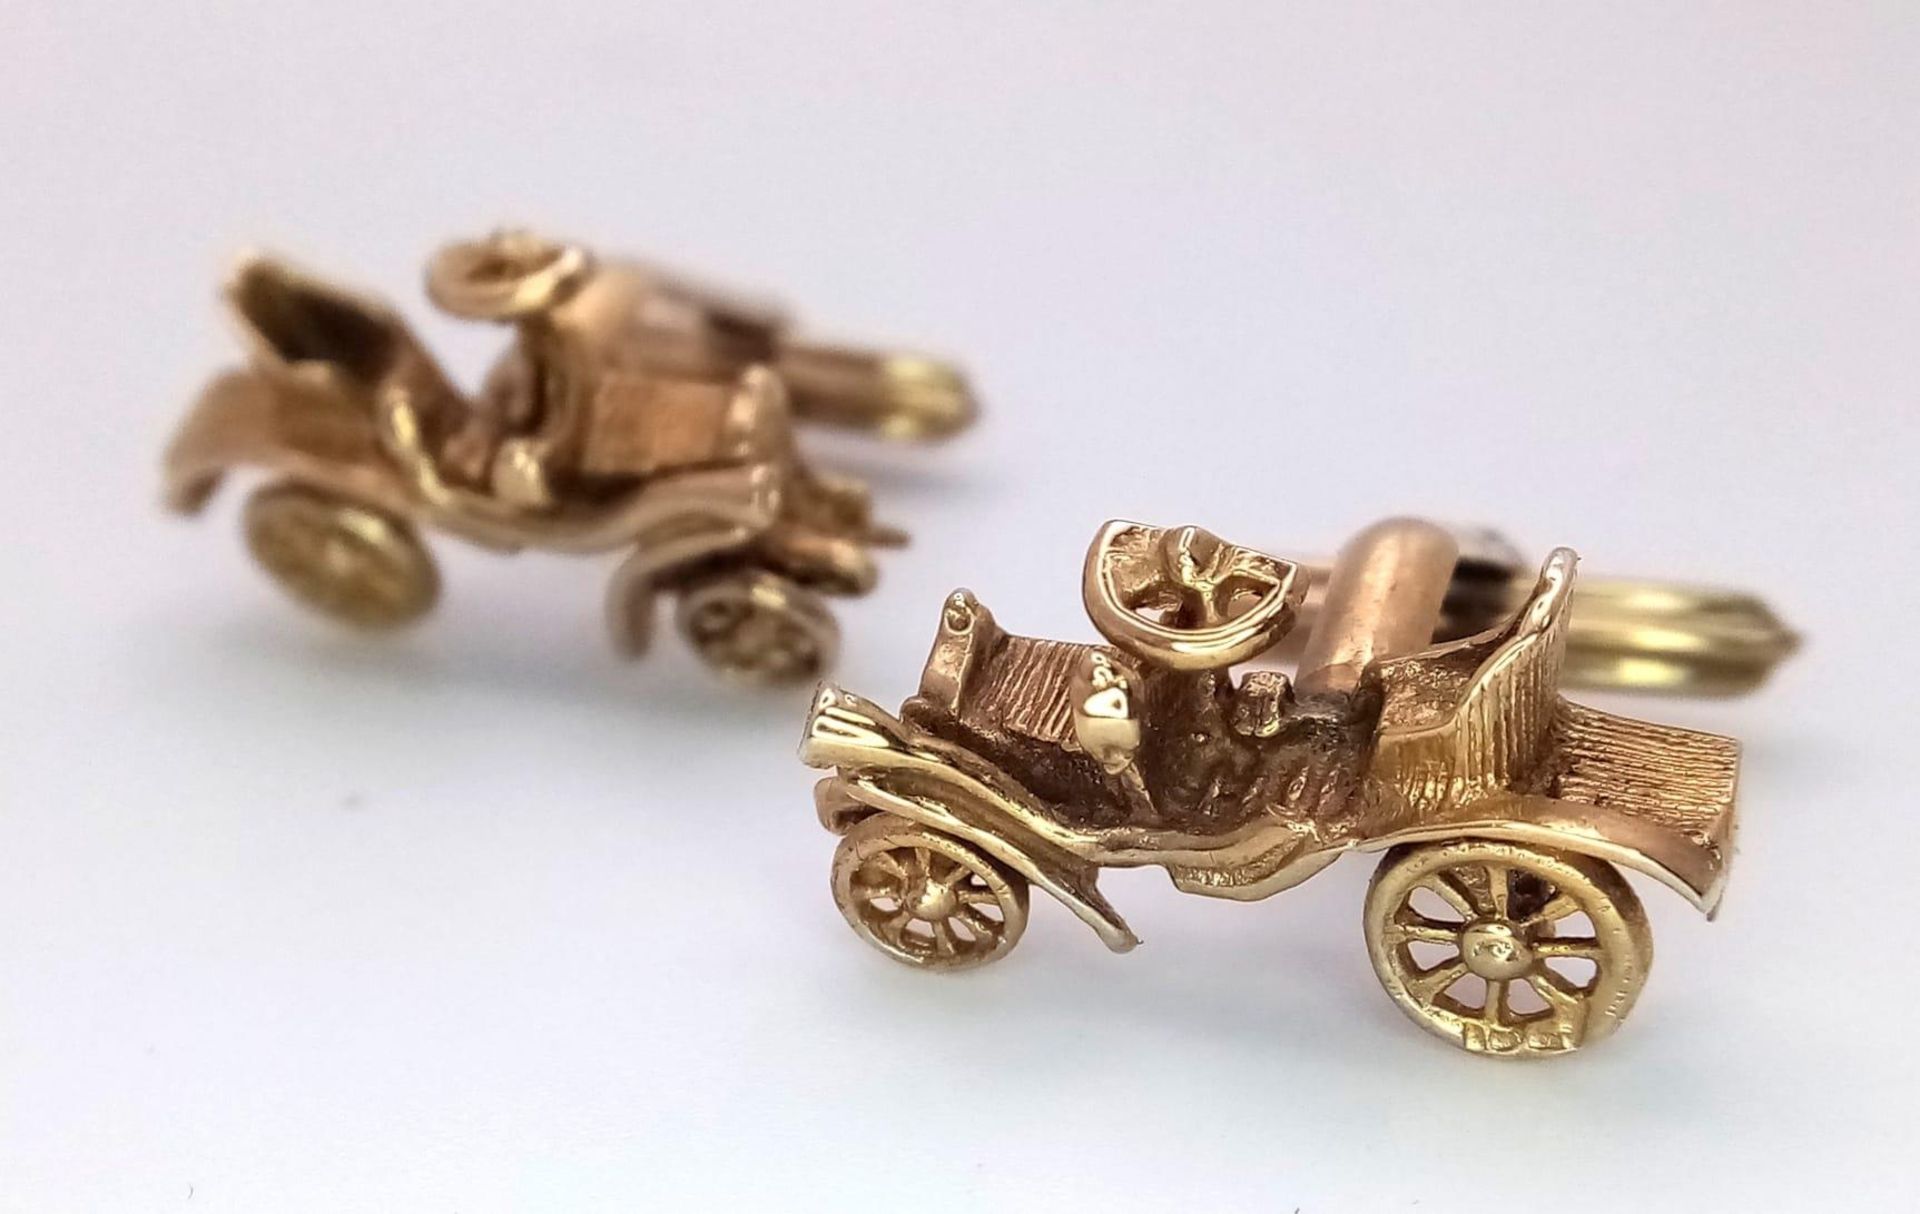 A Wonderful Vintage Pair of 9K Yellow Gold Car Cufflinks. 9.9g total weight.